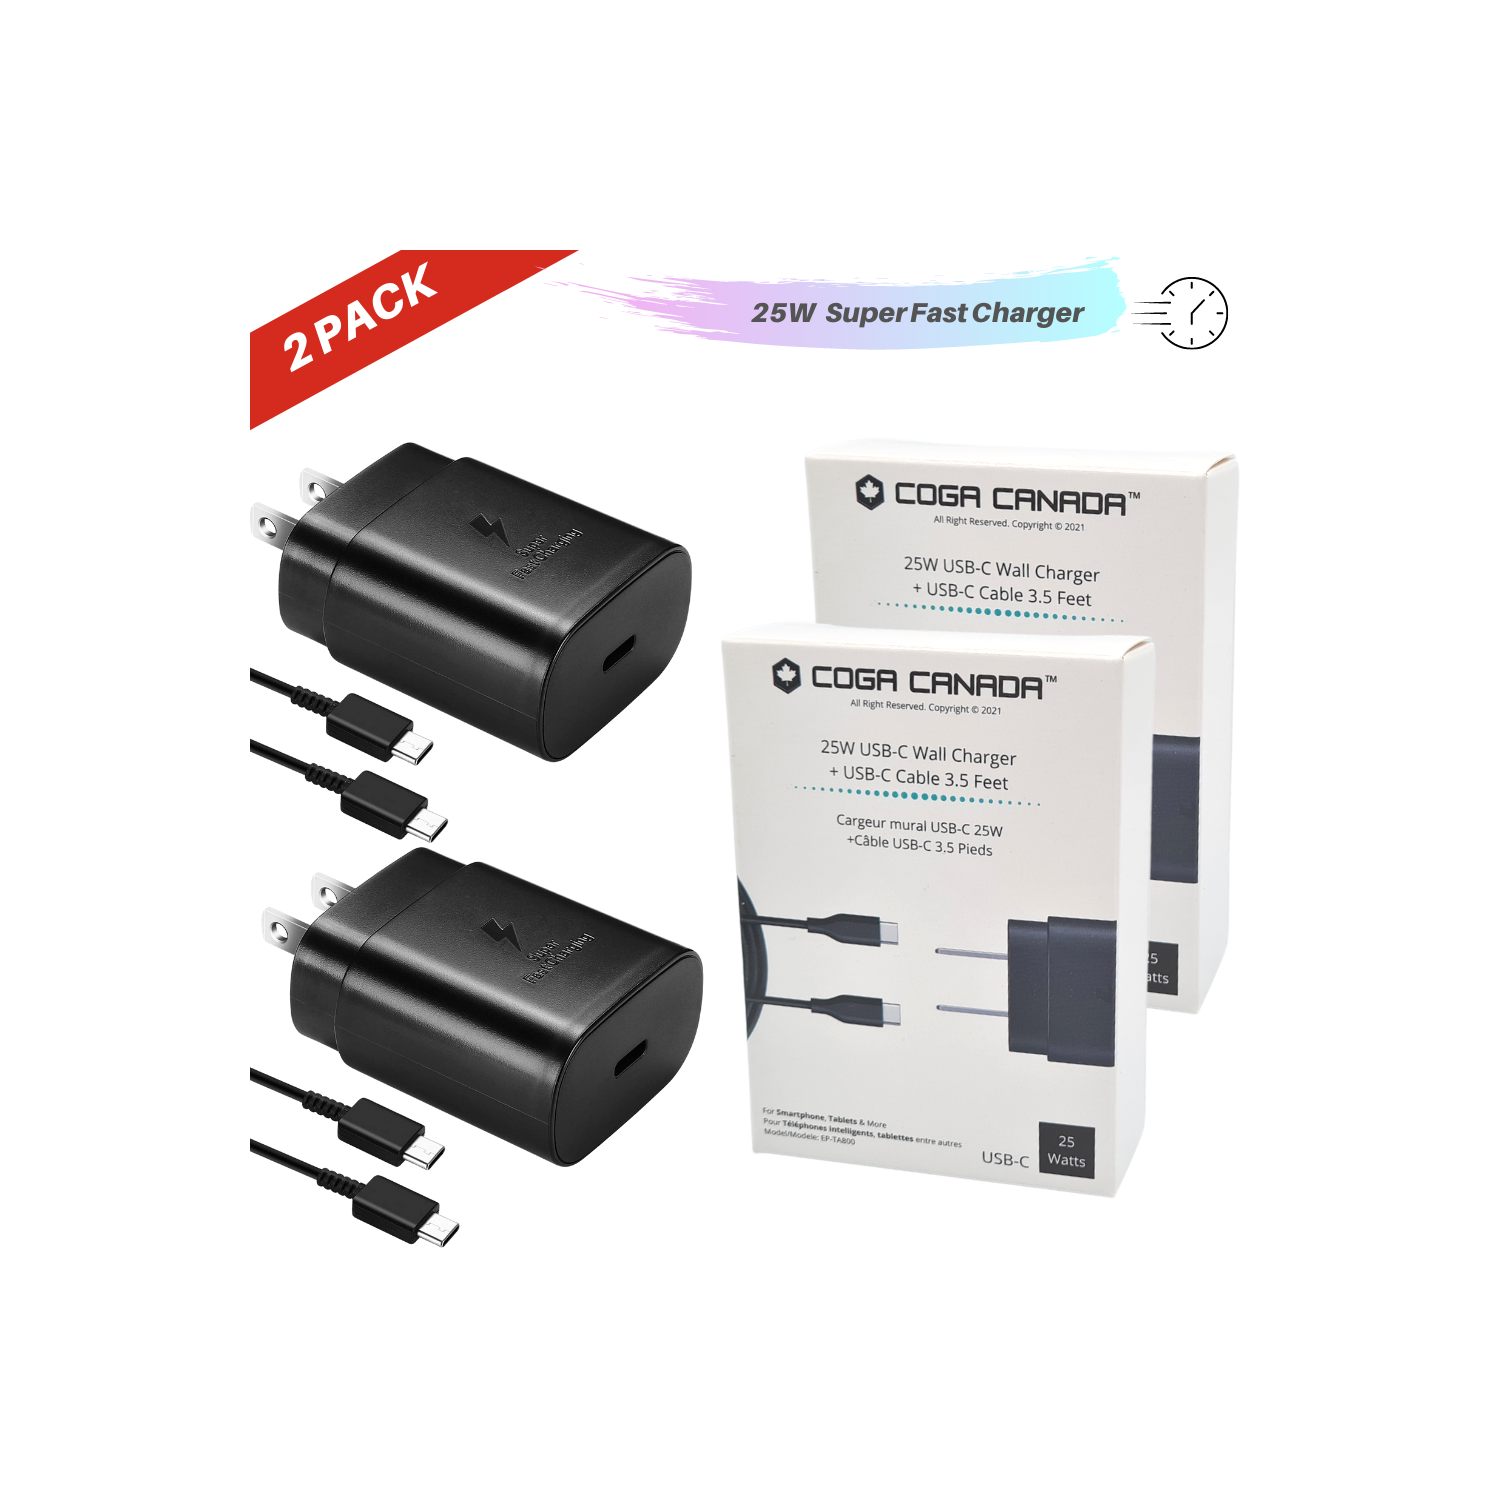 COGA Canada - [2 PACK] - 25W Super Fast Wall Charger + USB-C 3.5 Cable Samsung Galaxy S20/S21/S21+/S21Ultra/S10 5G /Note 10/Note 10 Plus/Note 20/S9 S8/S10e,iPad Pro 12.9/11,Google Pixel 3a 4 3 2 XL